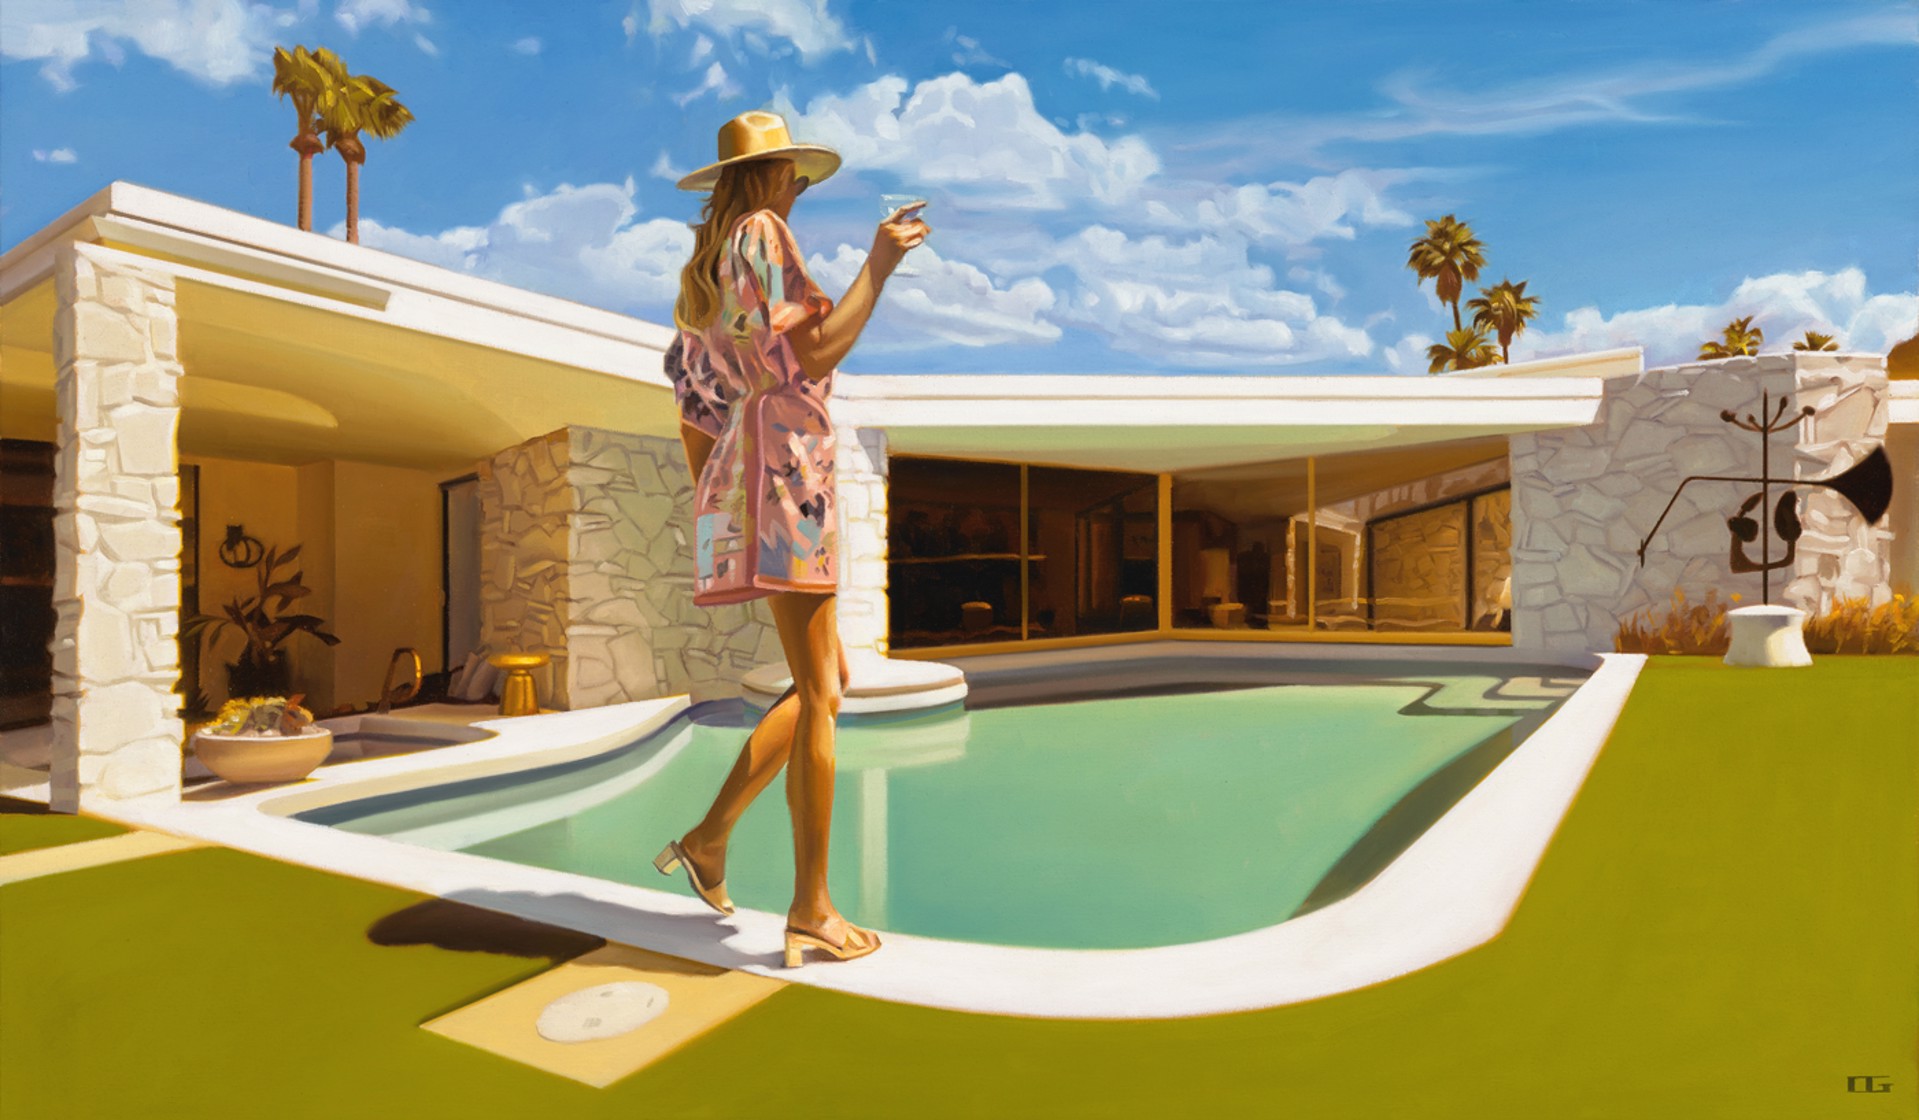 Palm Springs Perspective II by Carrie Graber